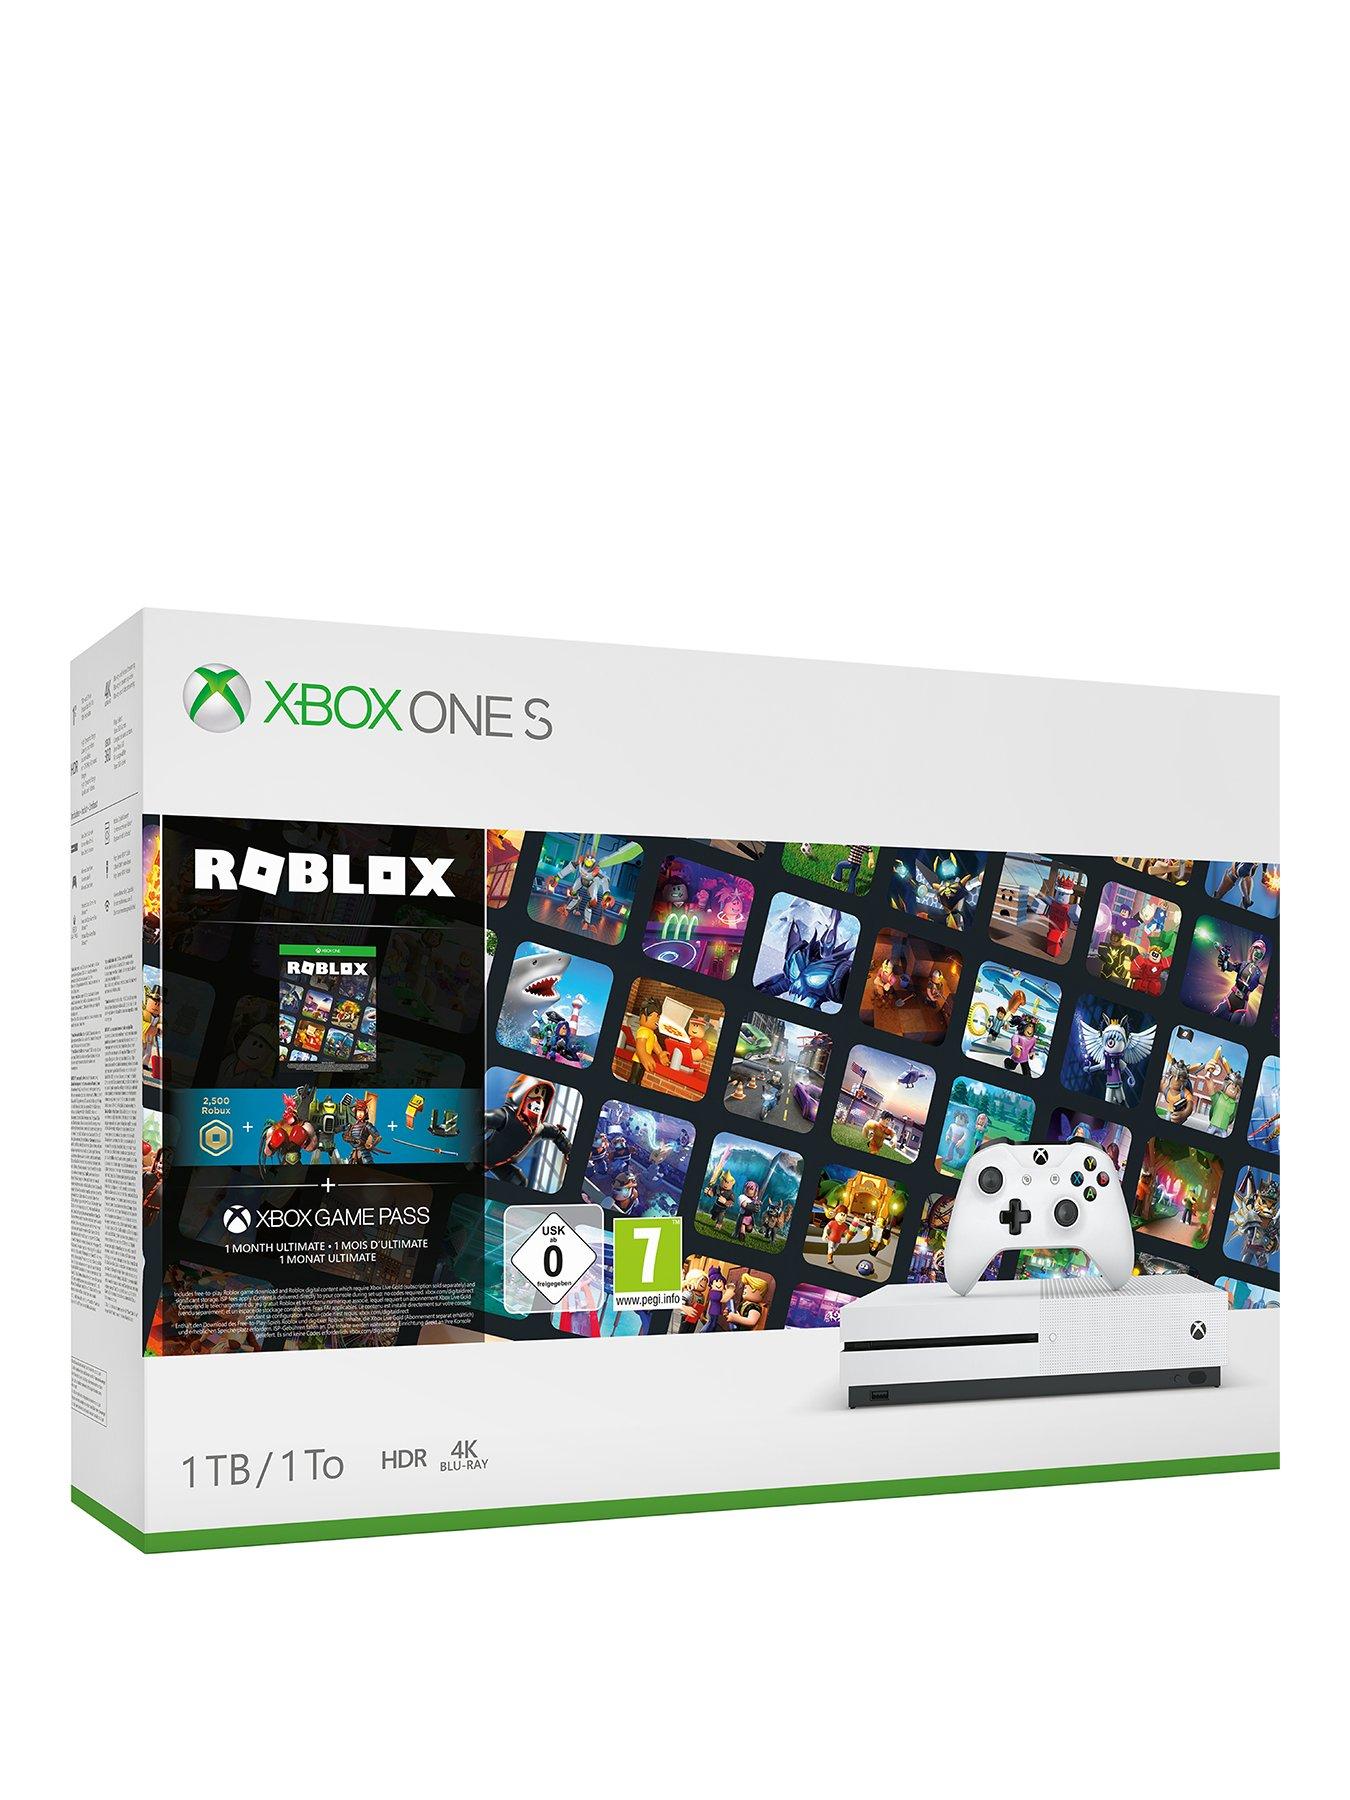 Xbox One S With Roblox Bundle And Optional Extras 1tb Console White Littlewoodsireland Ie - jeff tec robux